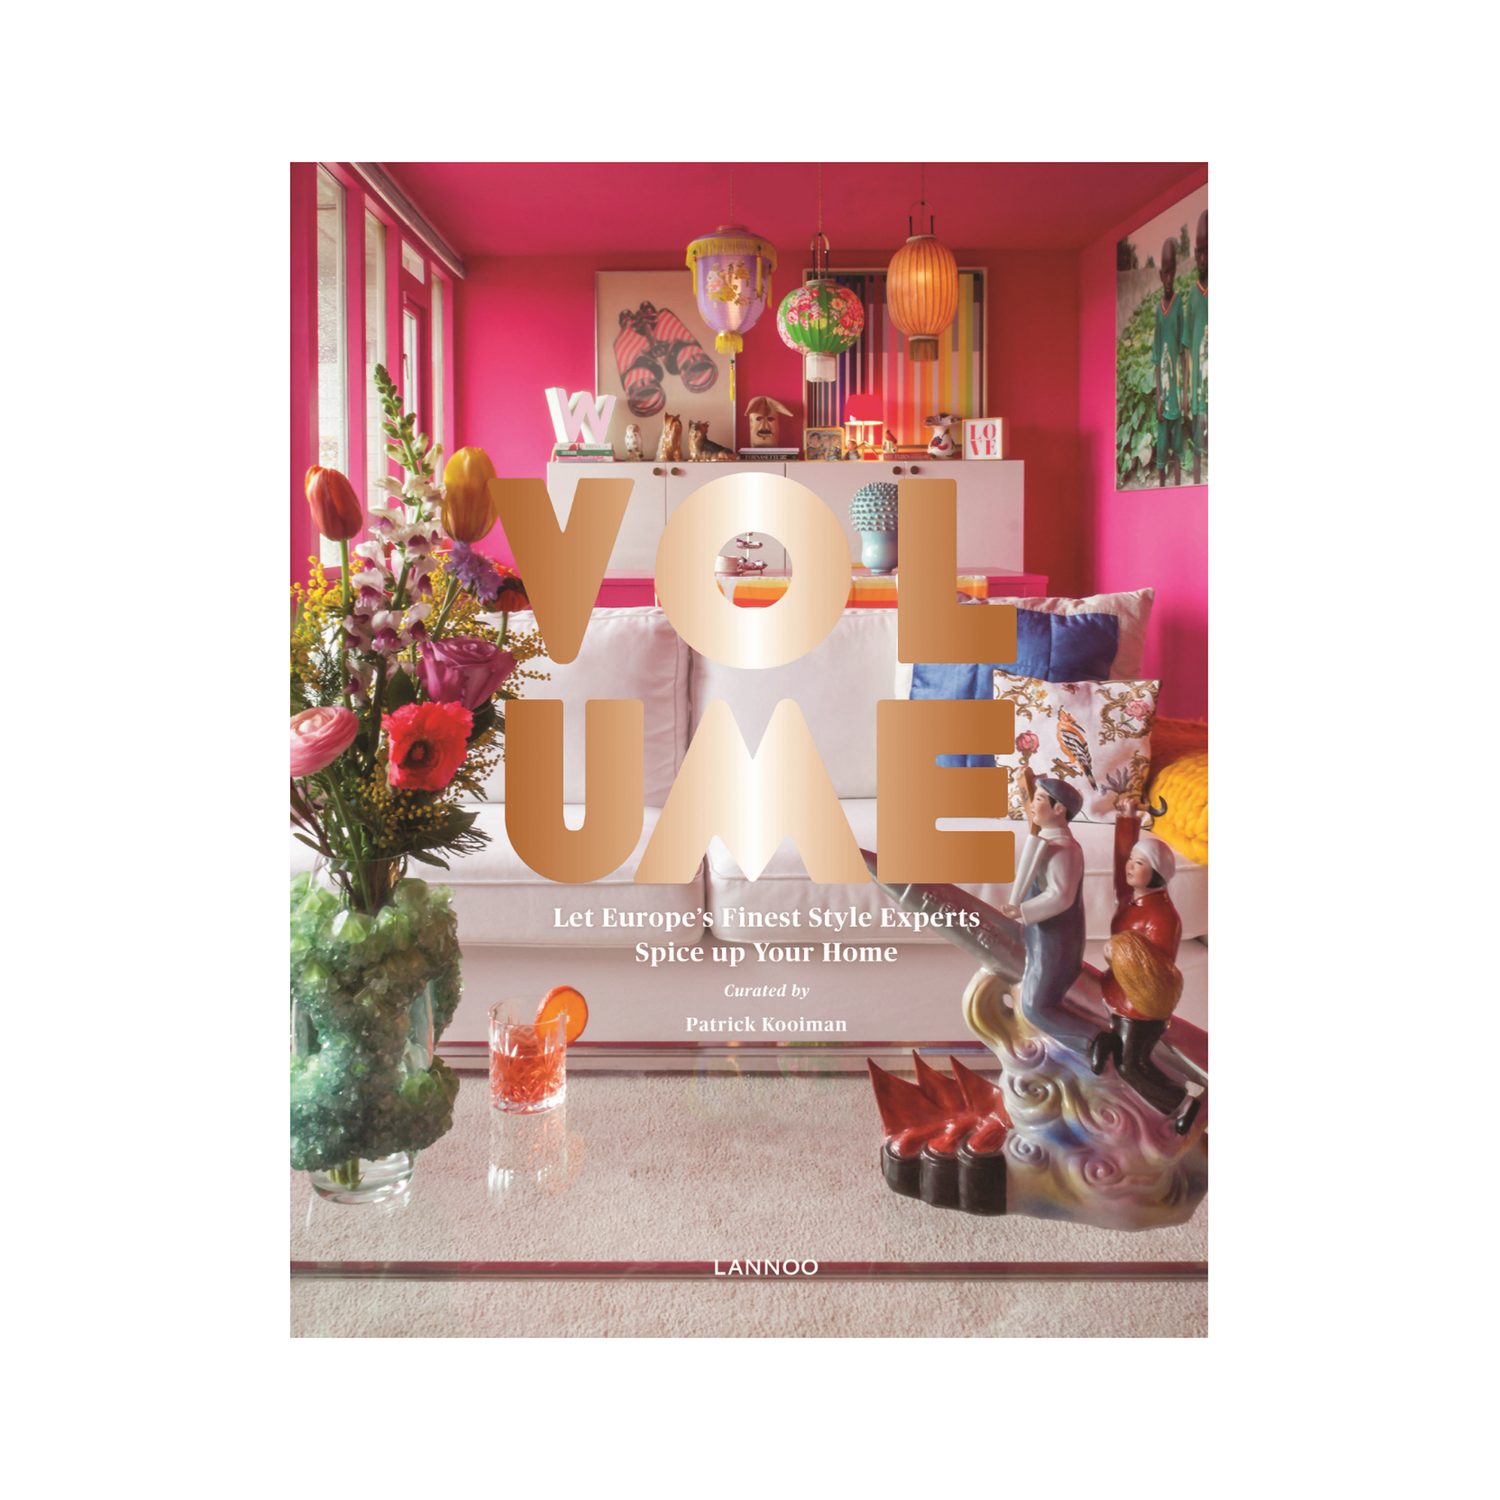 Book Volume Let Europe's Finest Style Experts Spice Up your Home